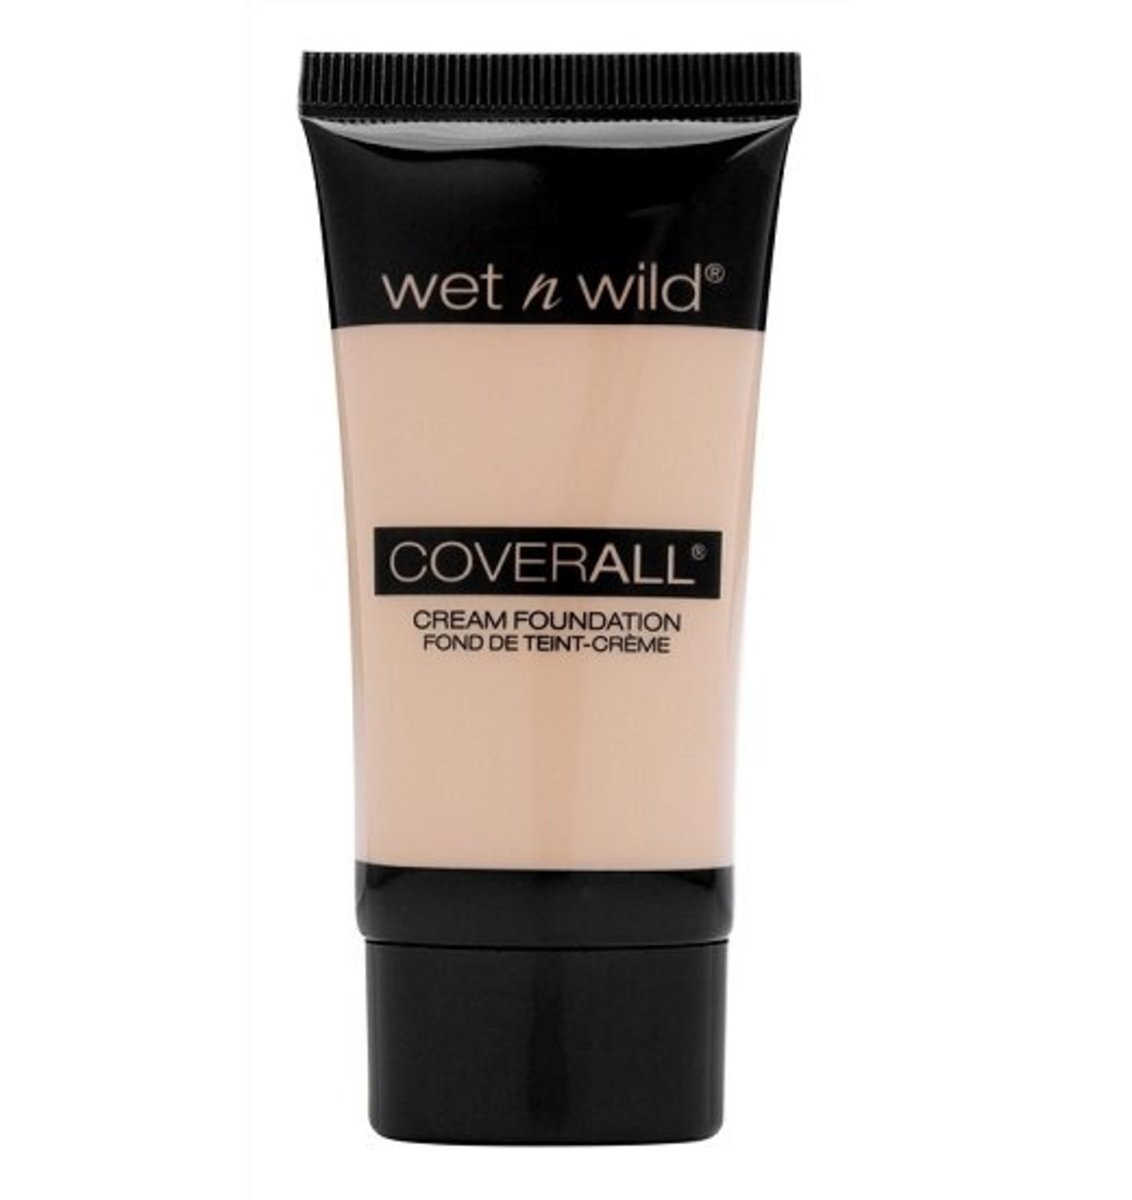 Wet 'n' Wild Coverall Cream Foundation